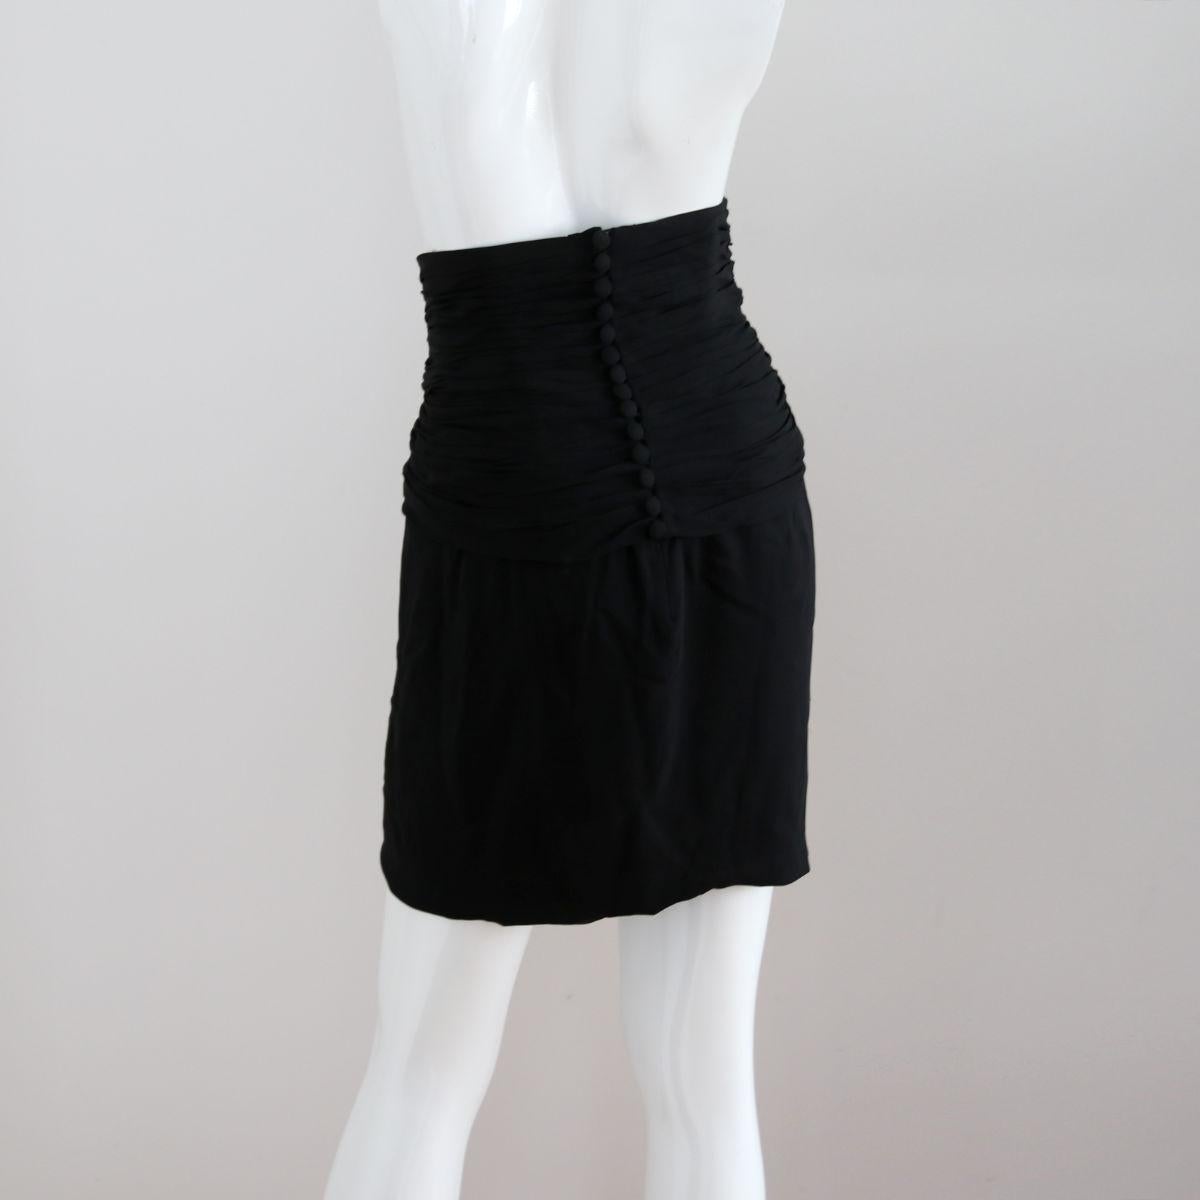 CHANEL 1996 Black Skirt With High Waist & Button Placket by Karl Lagerfeld 1